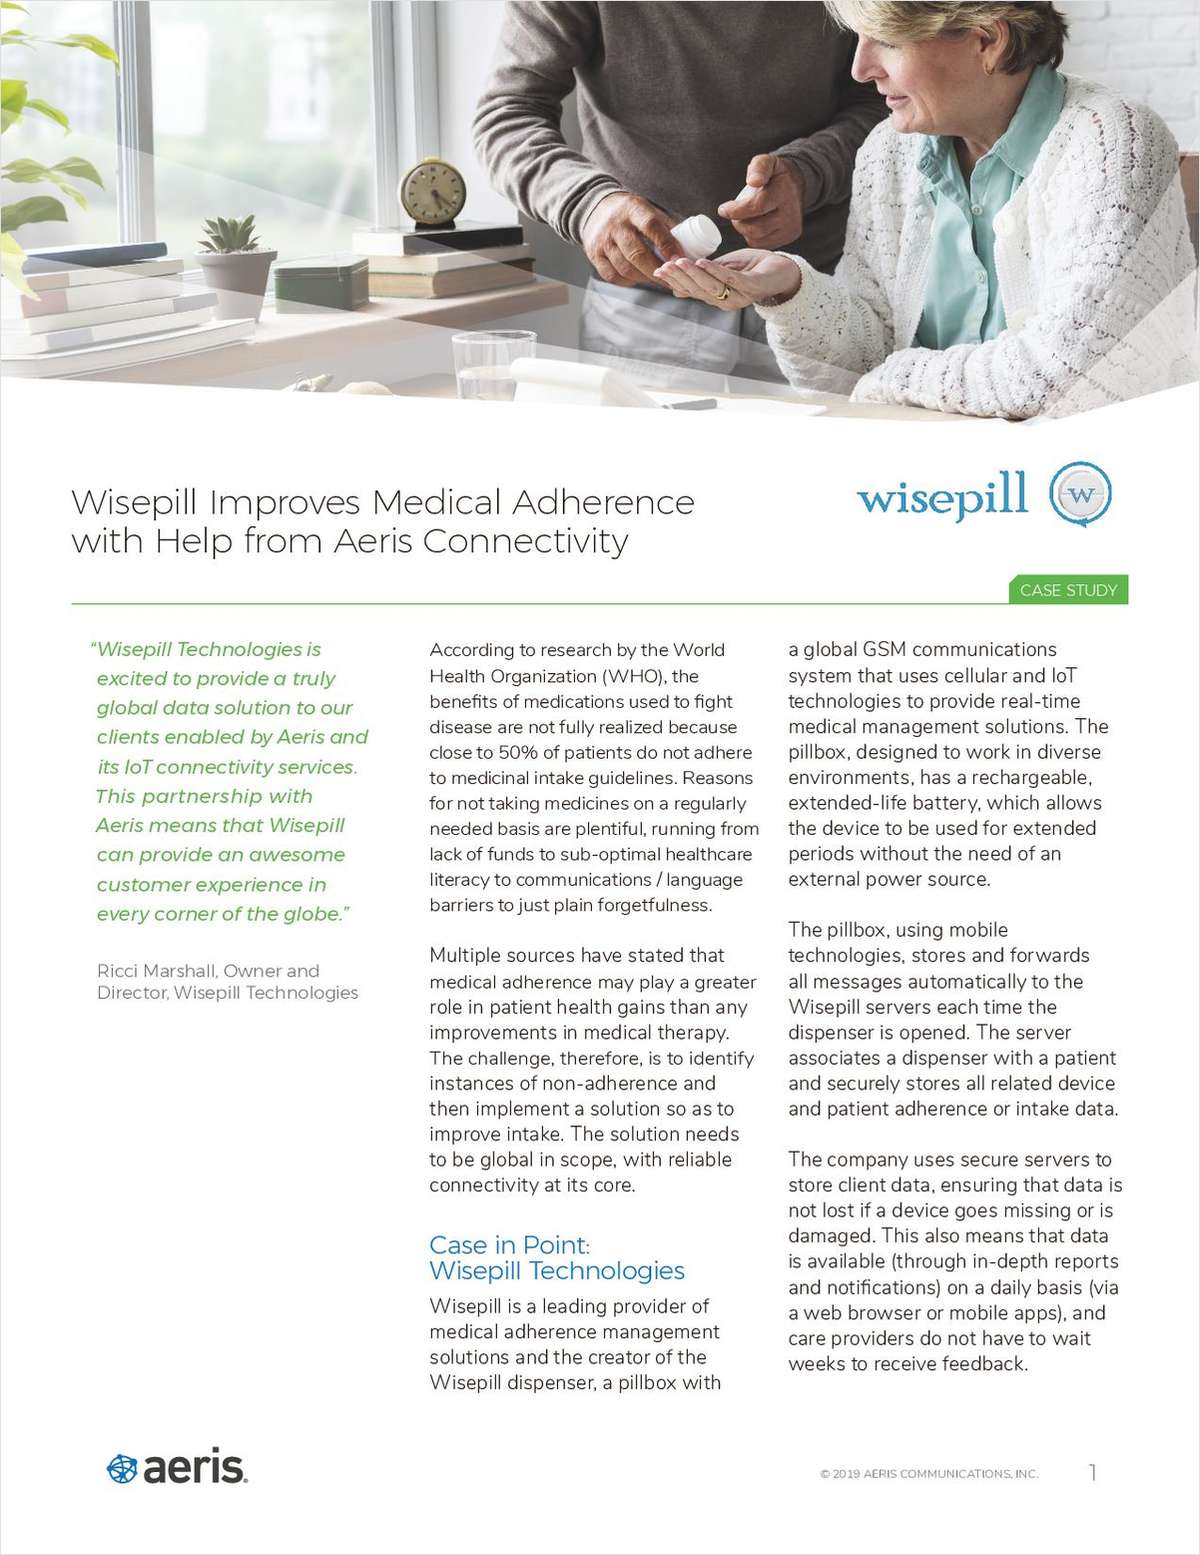 Wisepill Improves Medical Adherence with Help from Aeris Connectivity